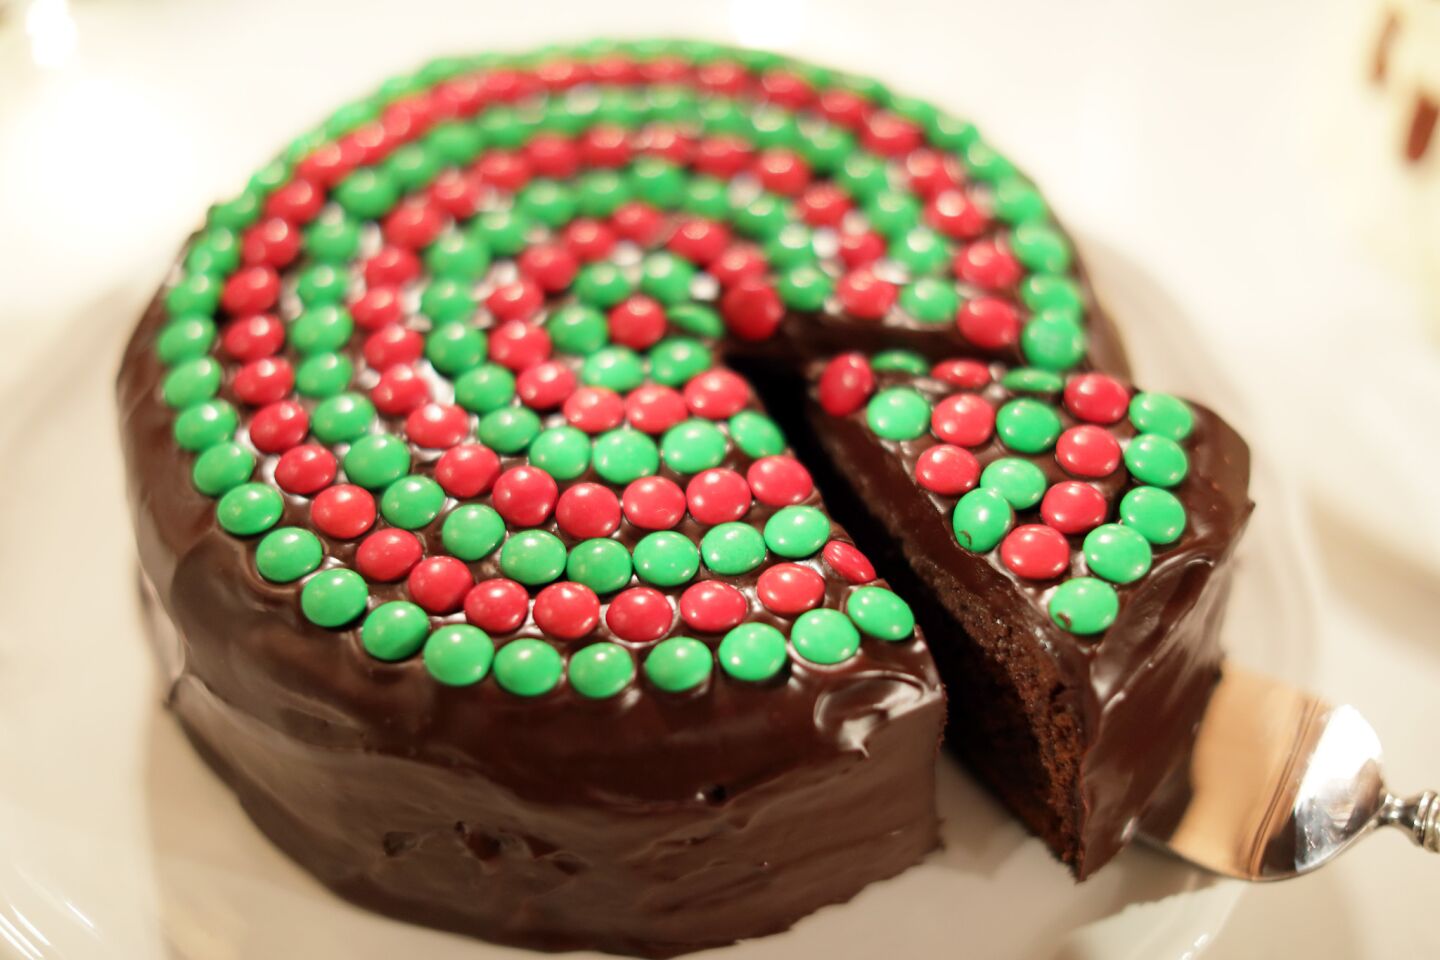 A chocolate cake topped with red and green candy.